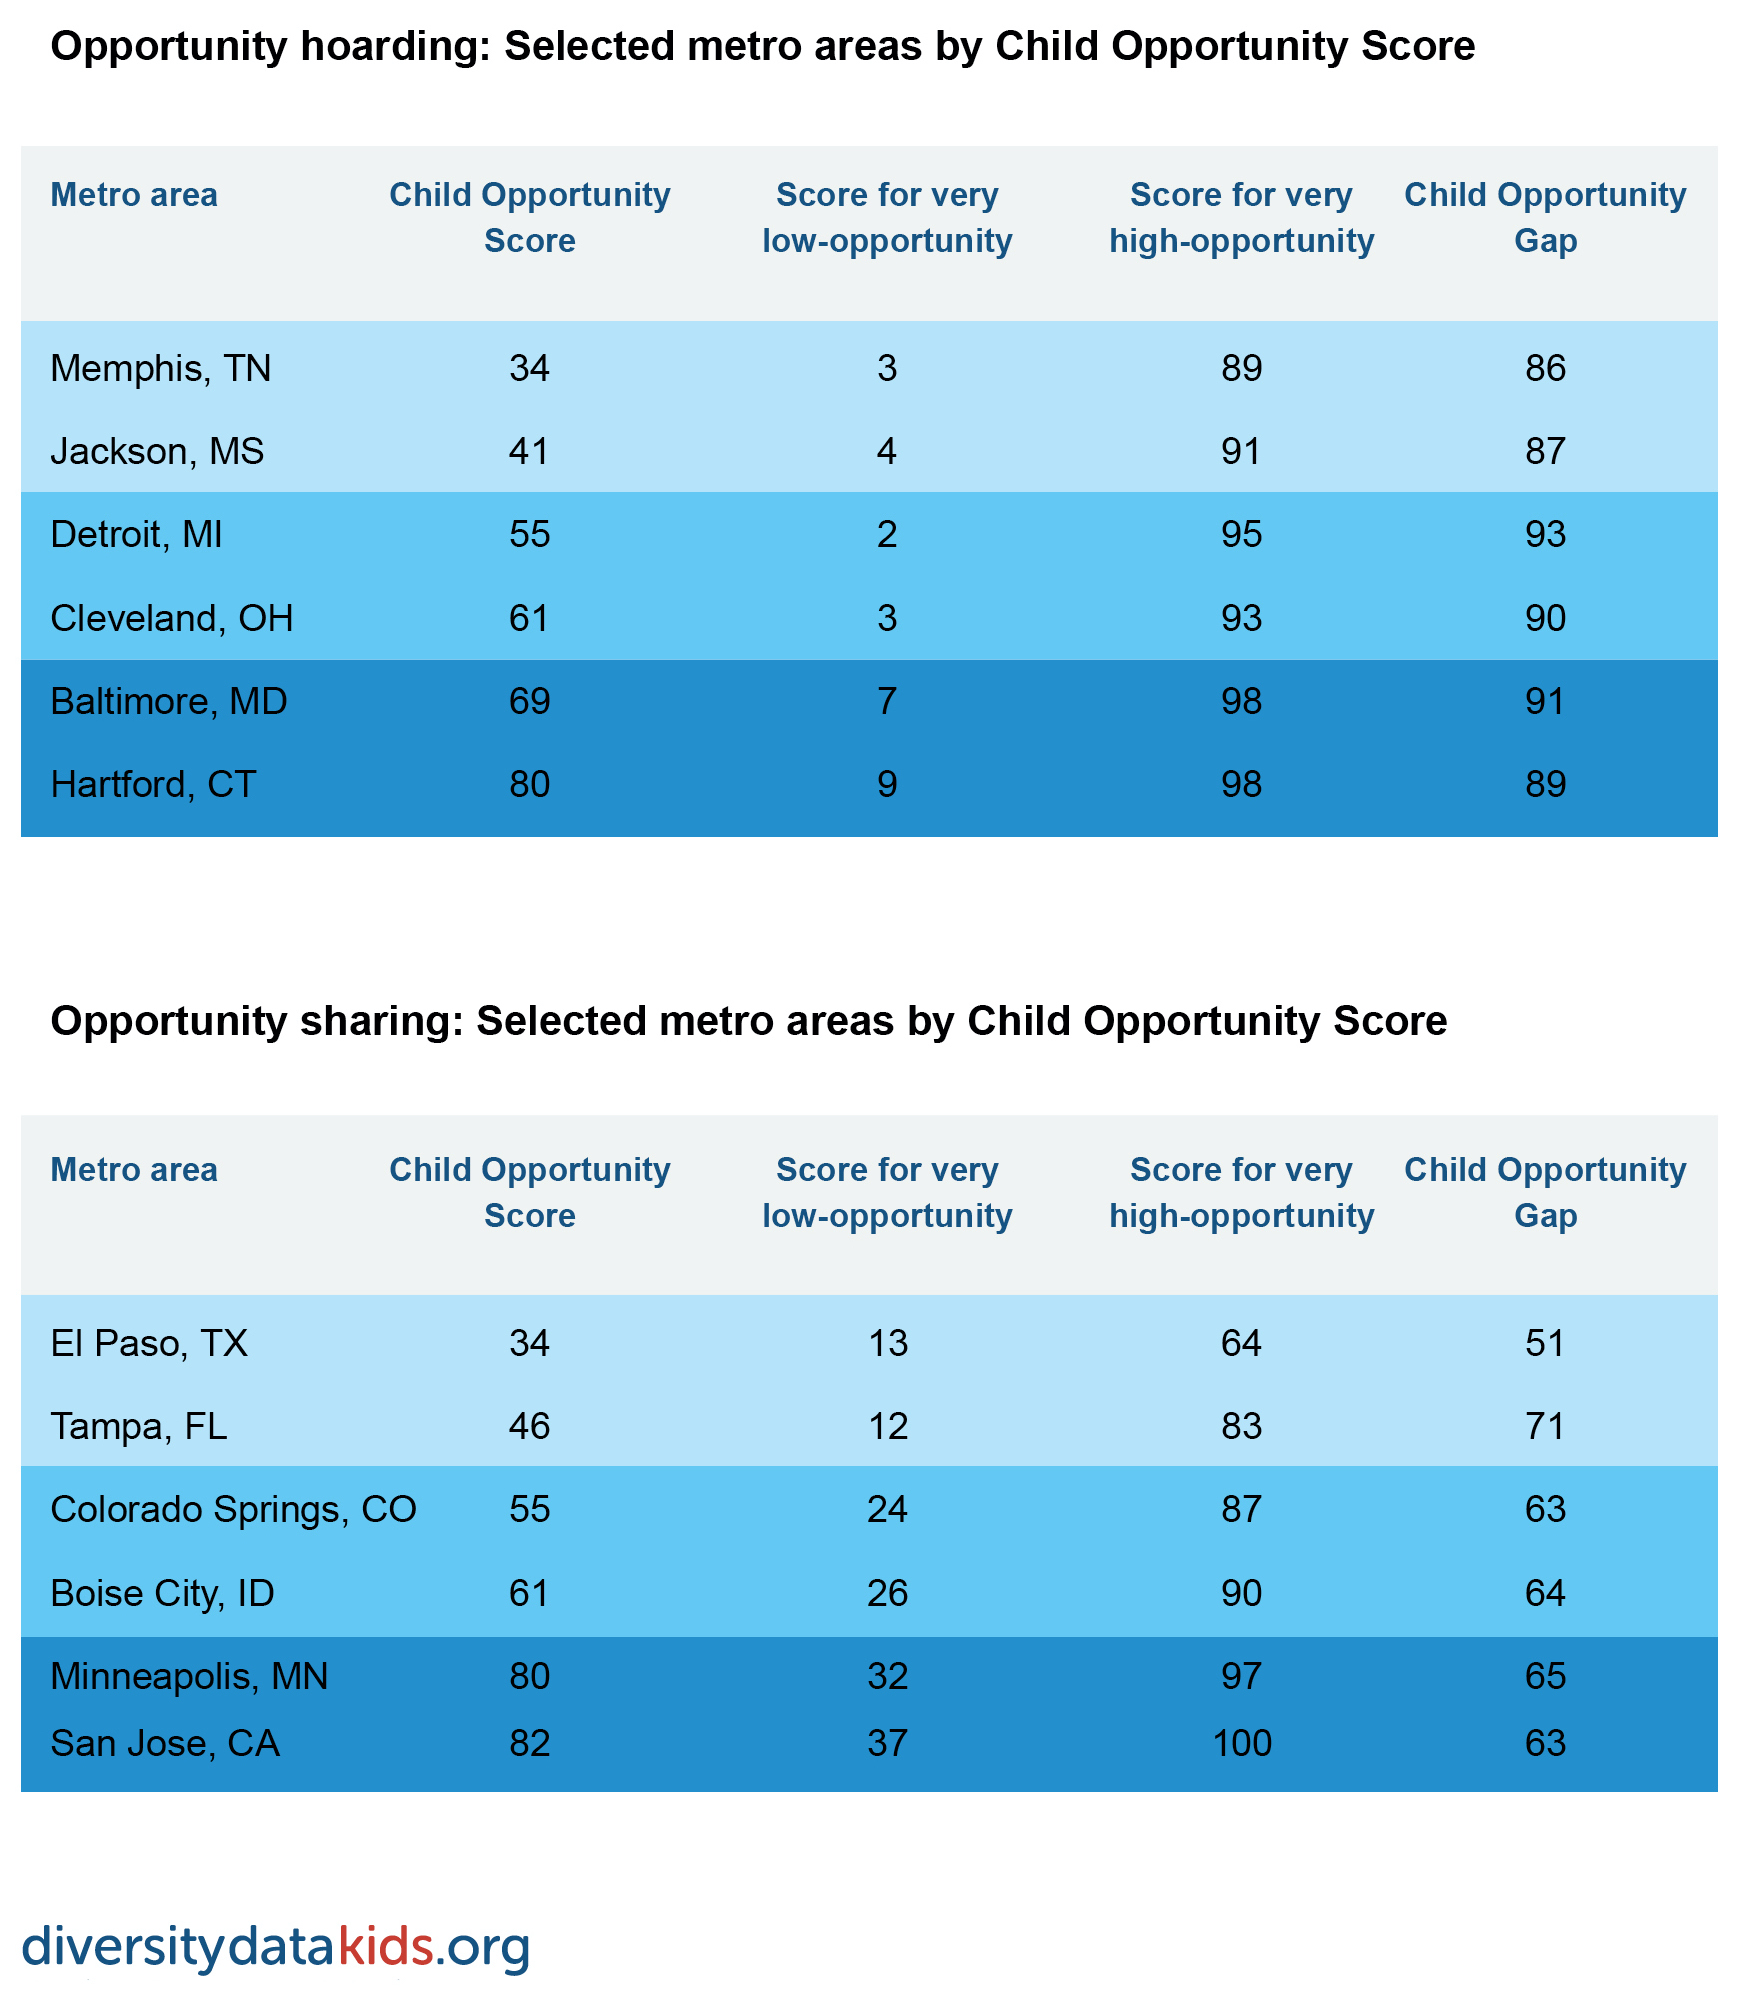 Table showing opportunity hoarding and sharing metros